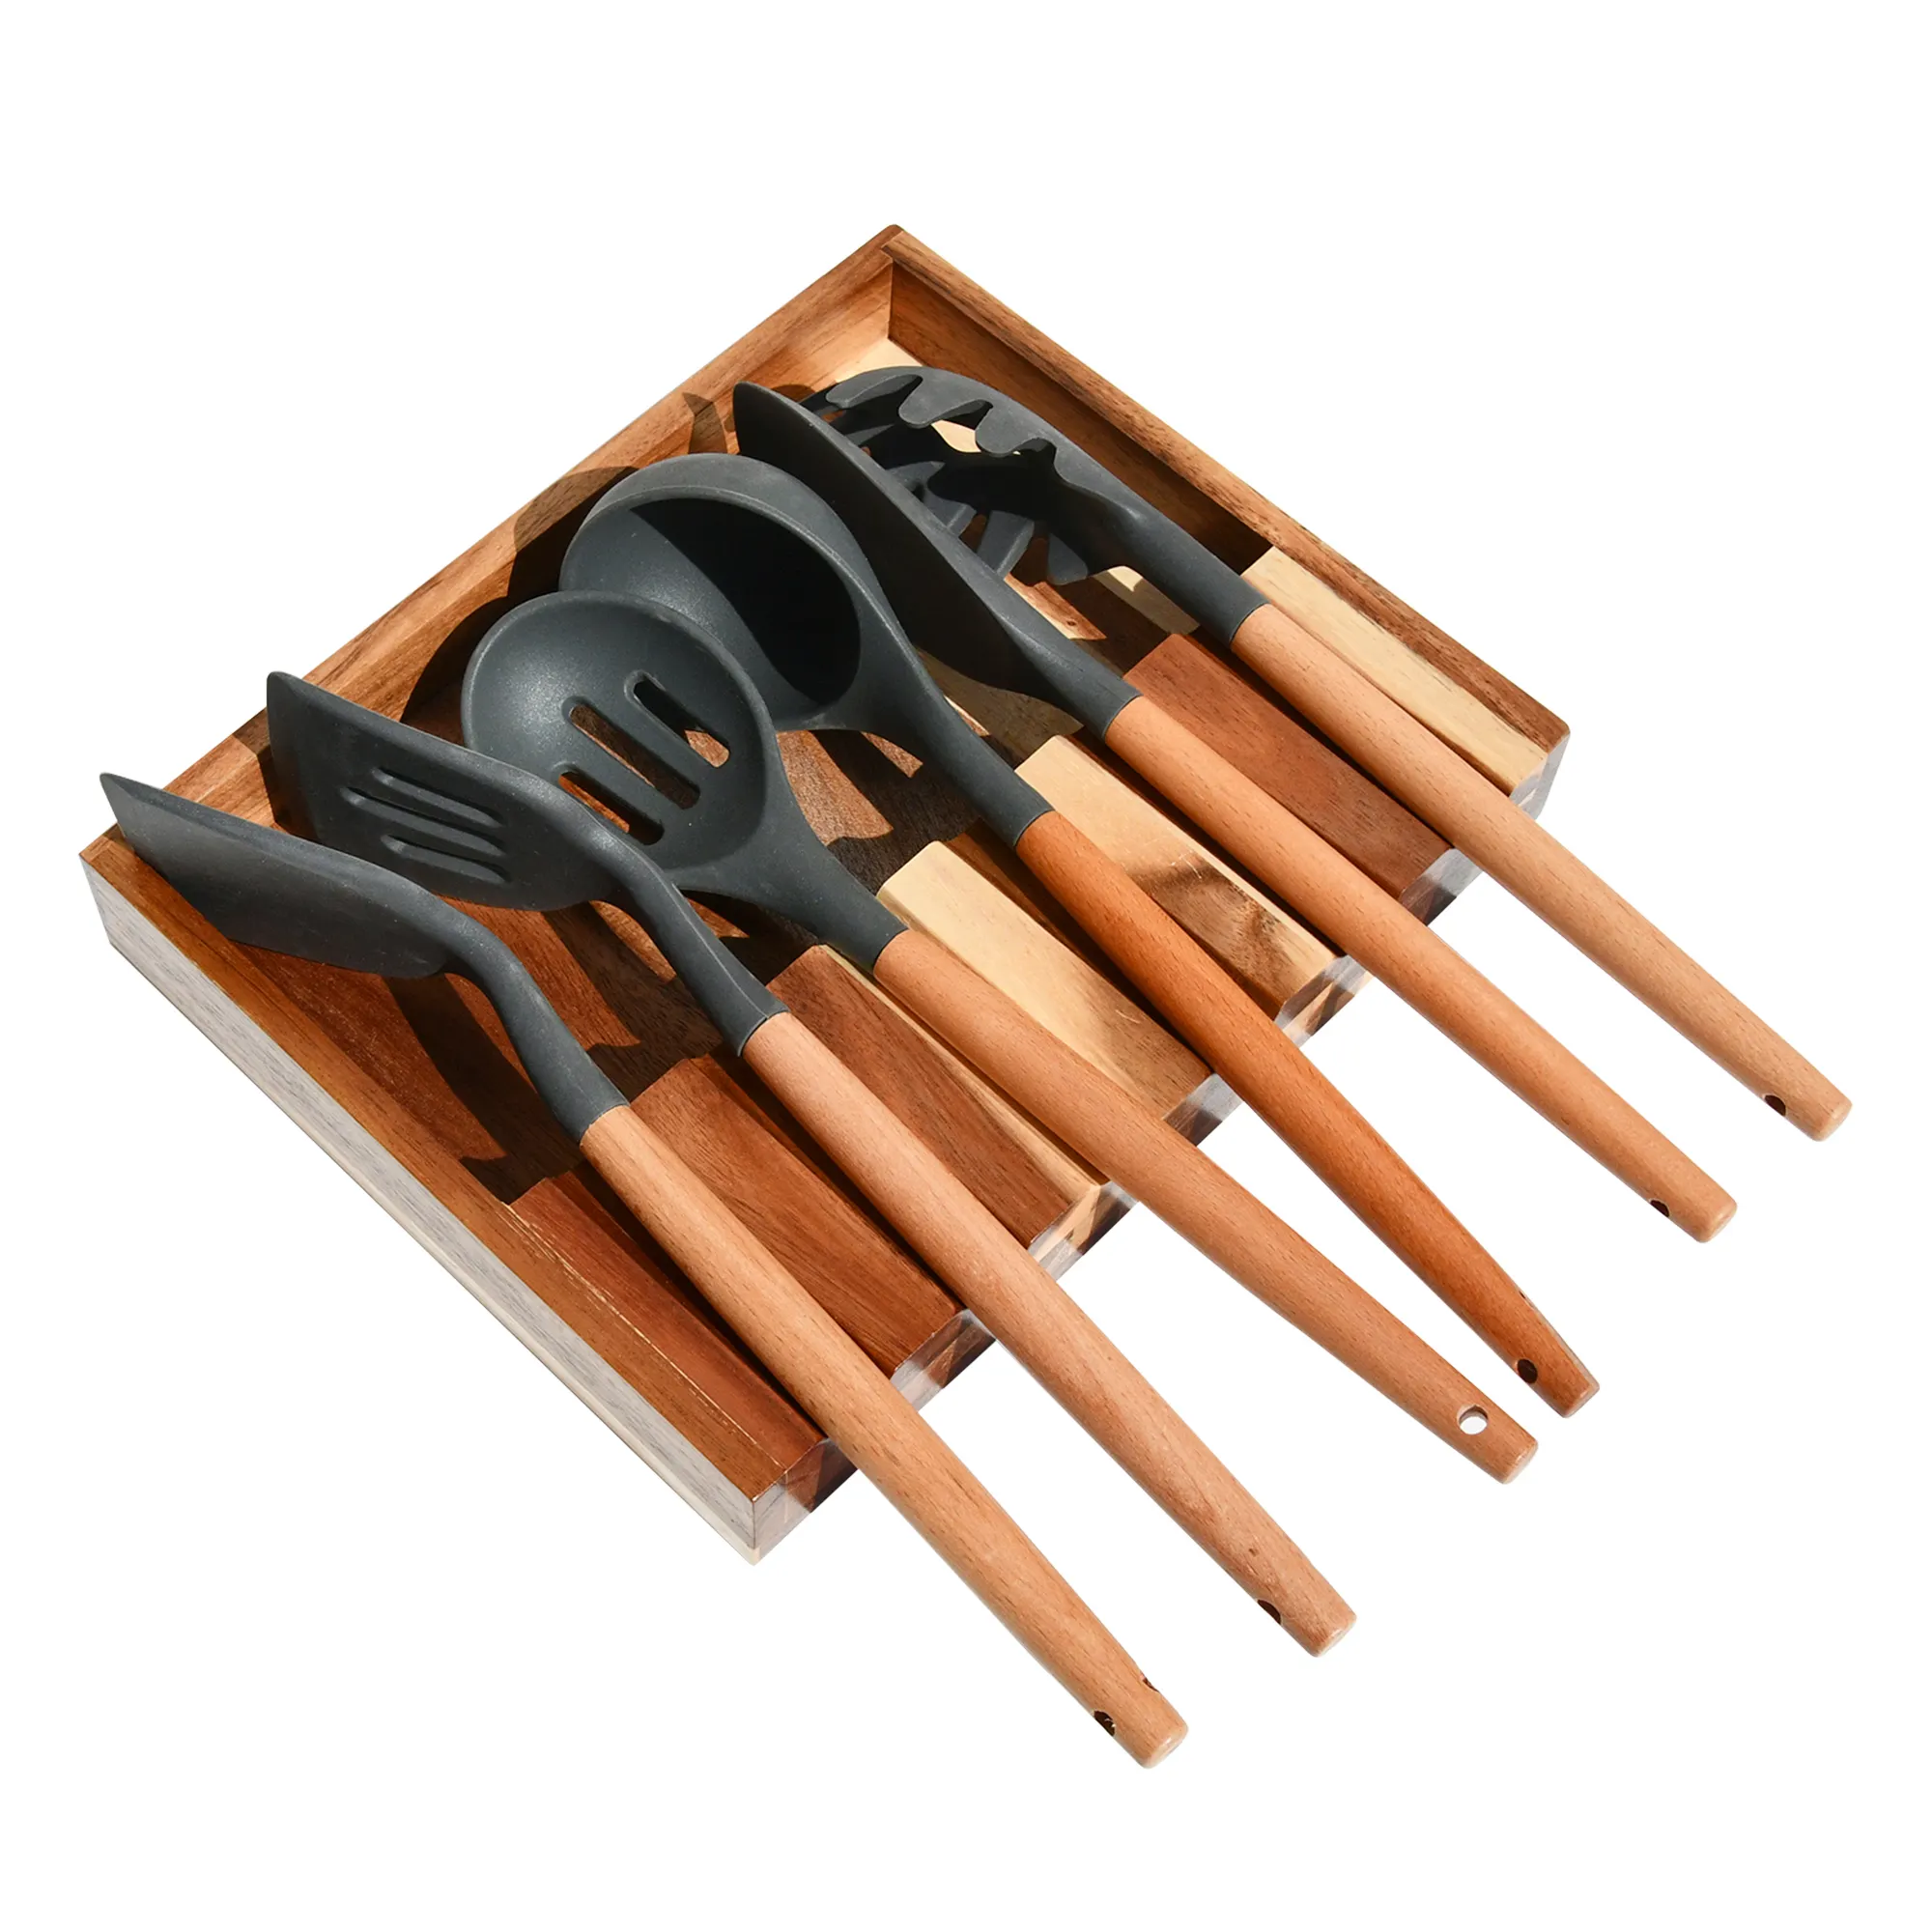 Wood Multiple Utensil Rest With Drip Pad Holder For Stove Top Kitchen Holder Brushes Spatulas Ladles Forks